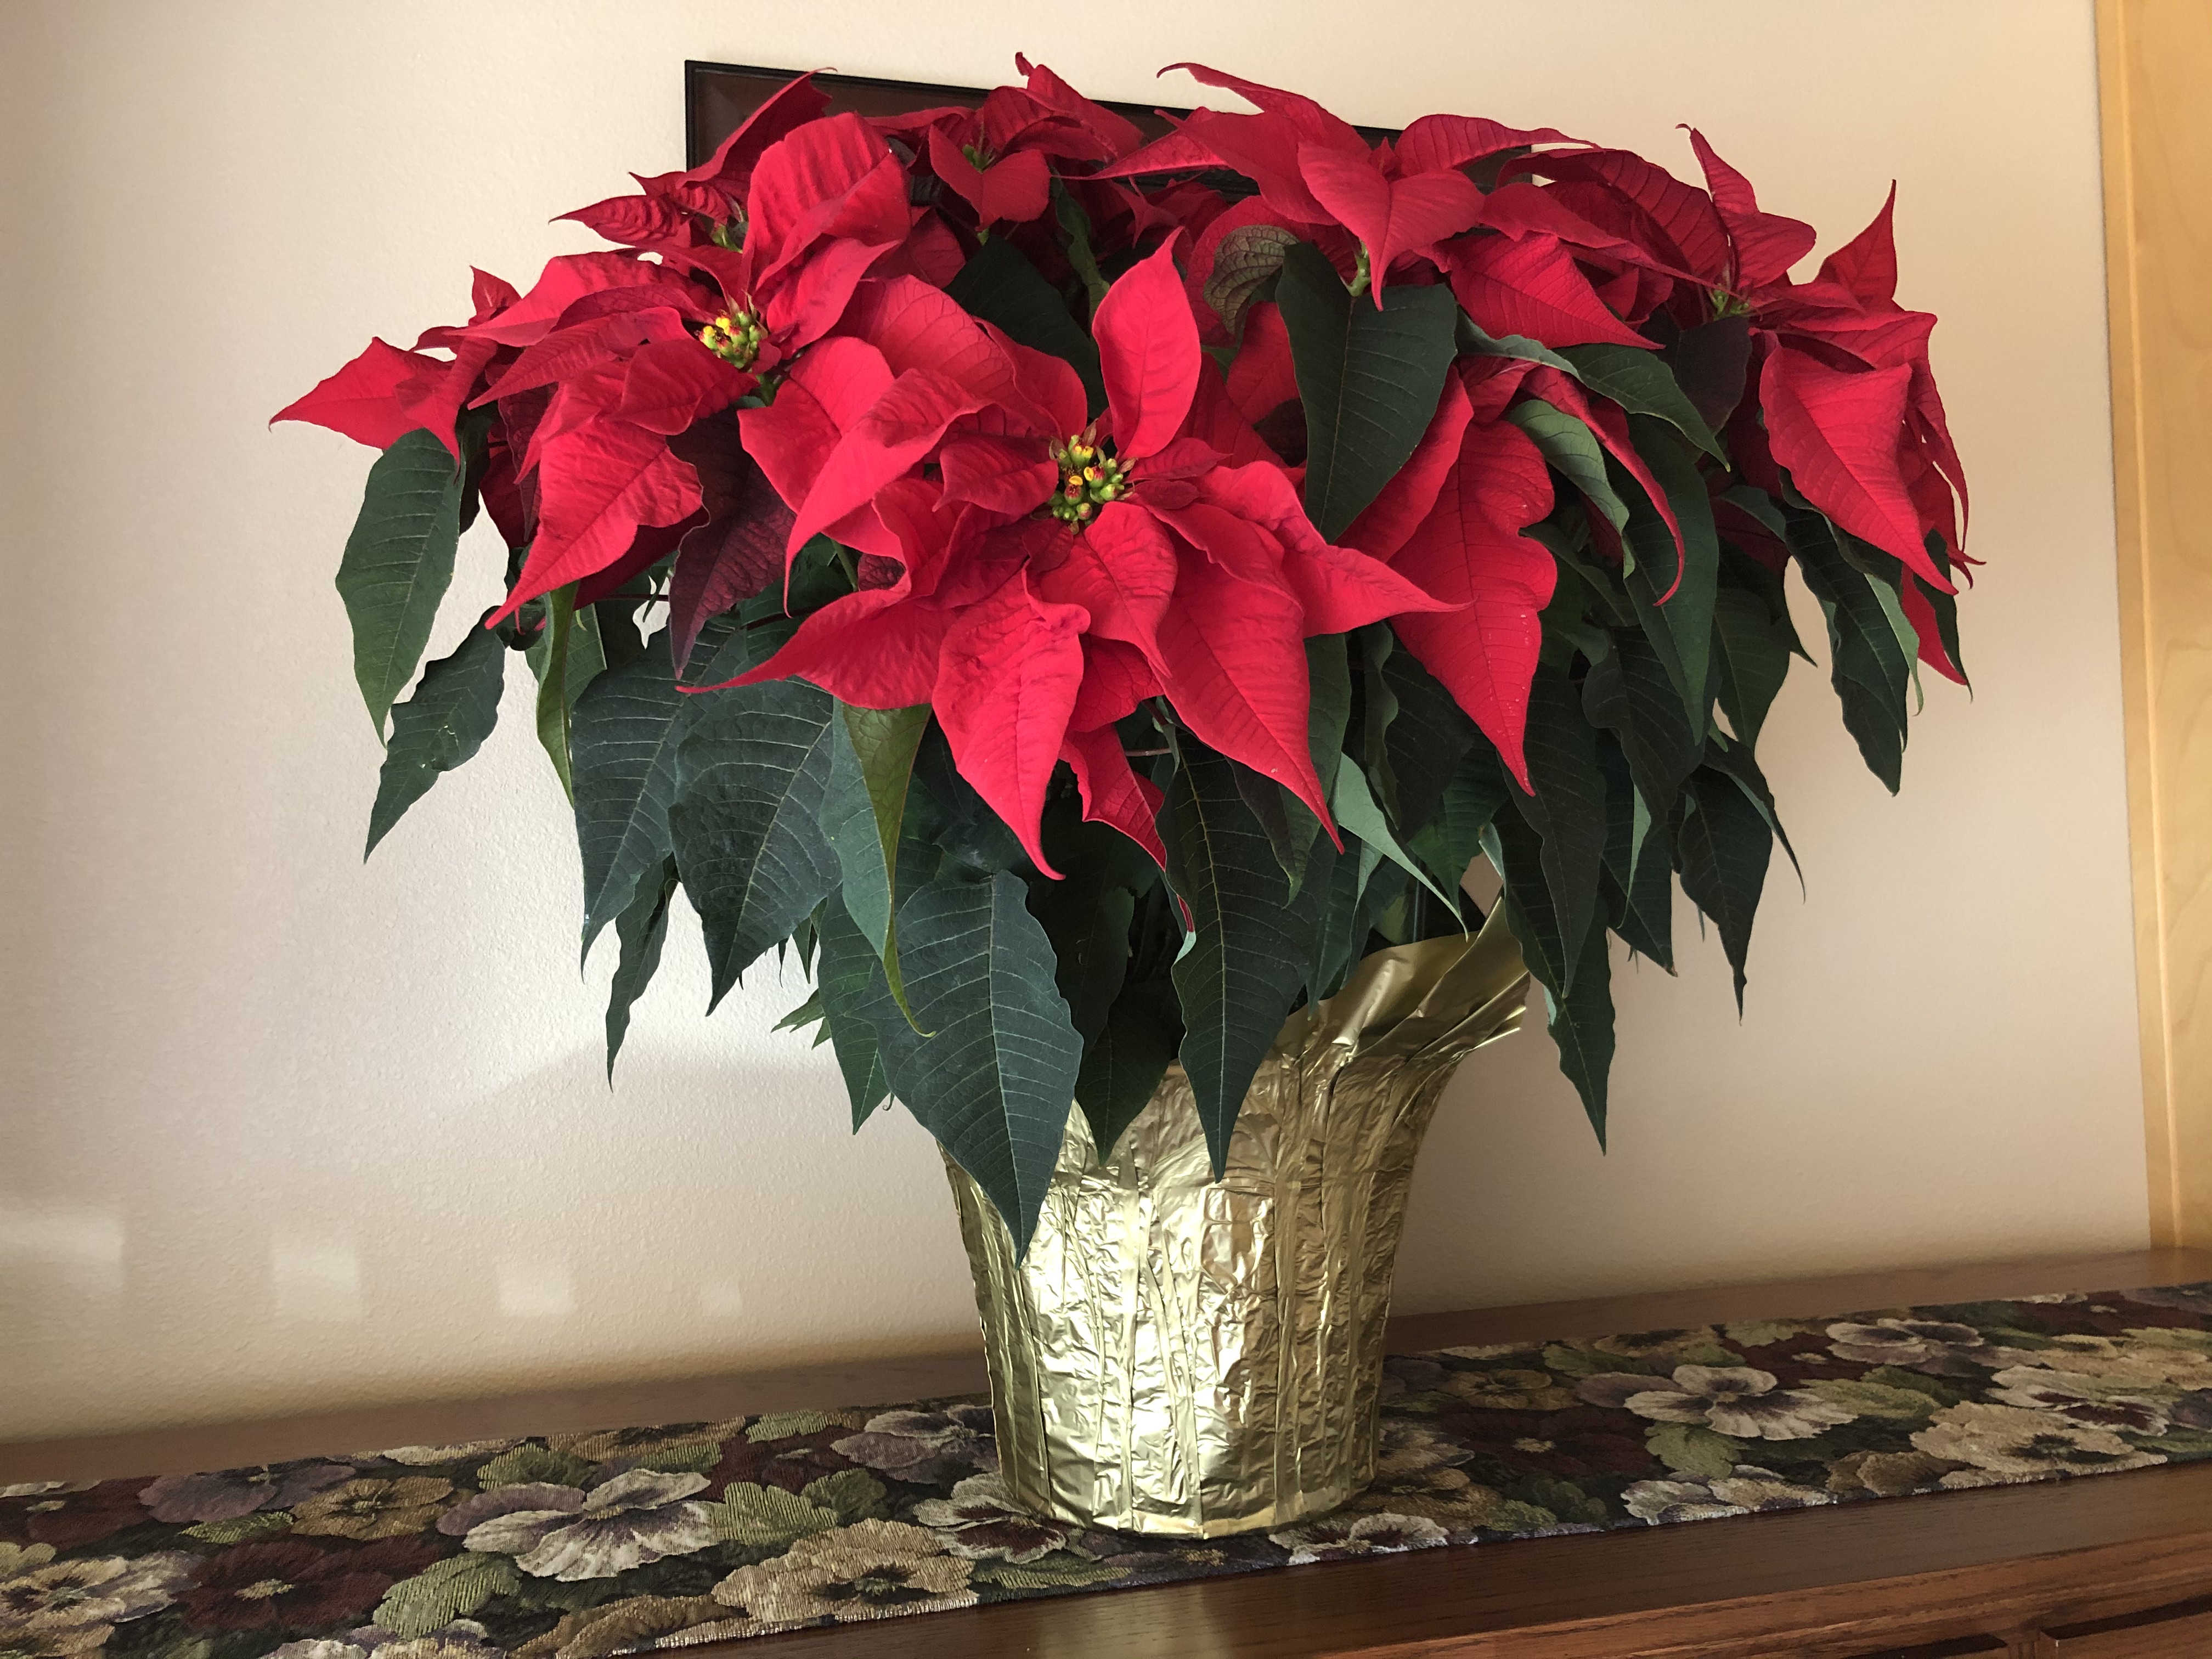 In their natural state, poinsettias are a scraggly large shrub reaching 10 feet tall, but an innovative family of horticulturists helped transform the plant into the version we know today. (NDSU photo)